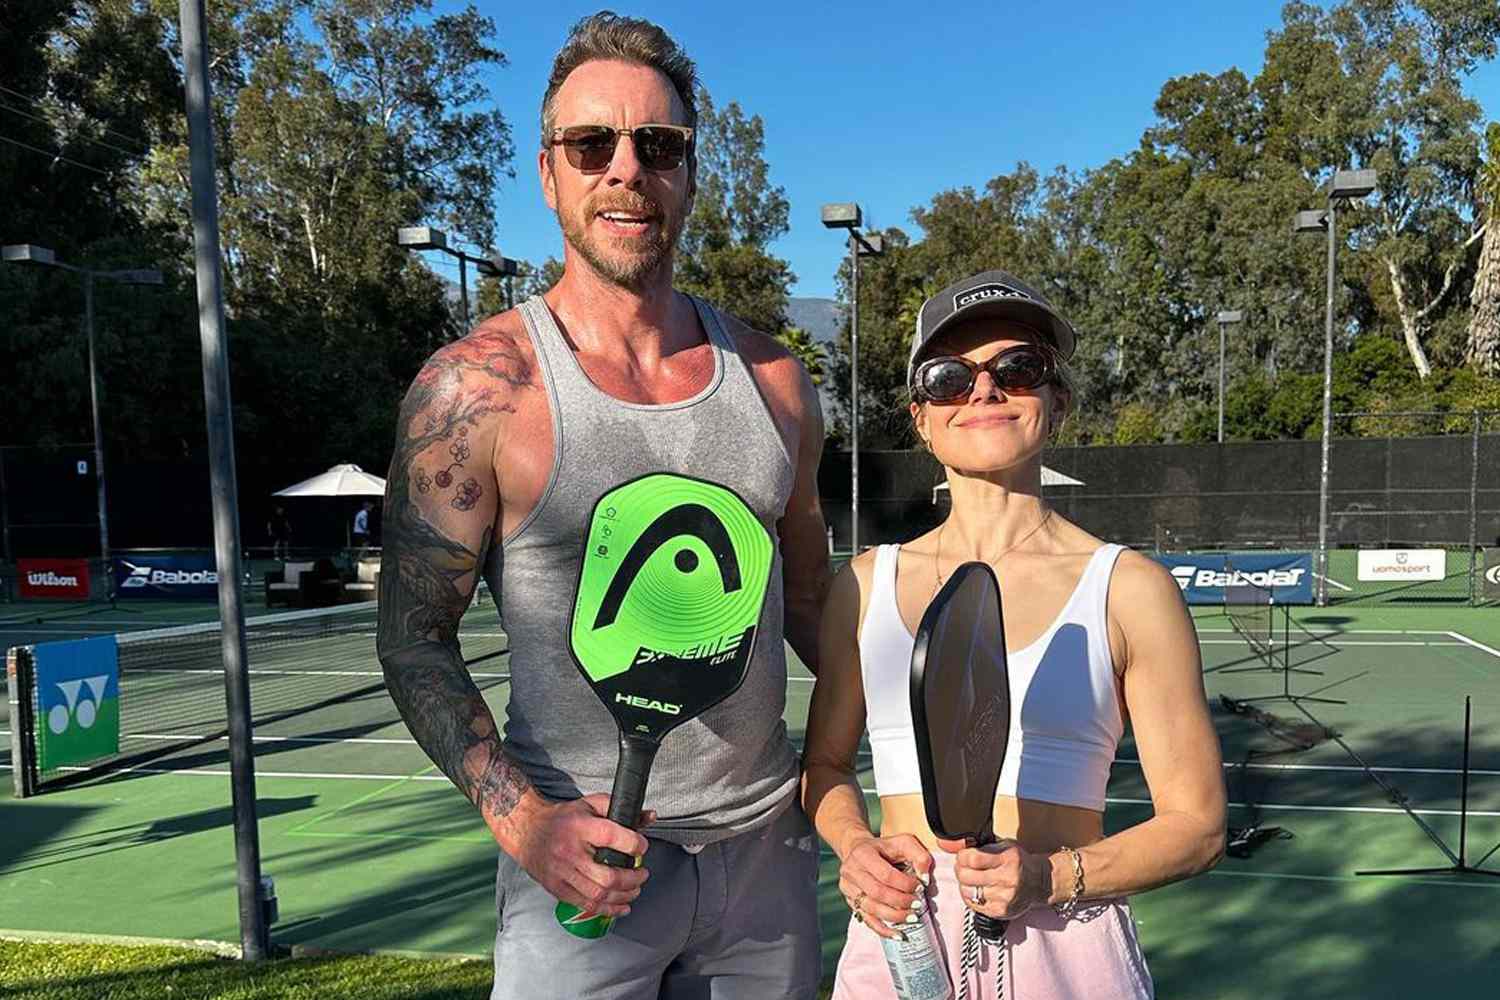 Dax Shepard and Kristen Bell Reveal They Have 'Finally' Tried Pickleball: 'We Are Completely Addicted Now'